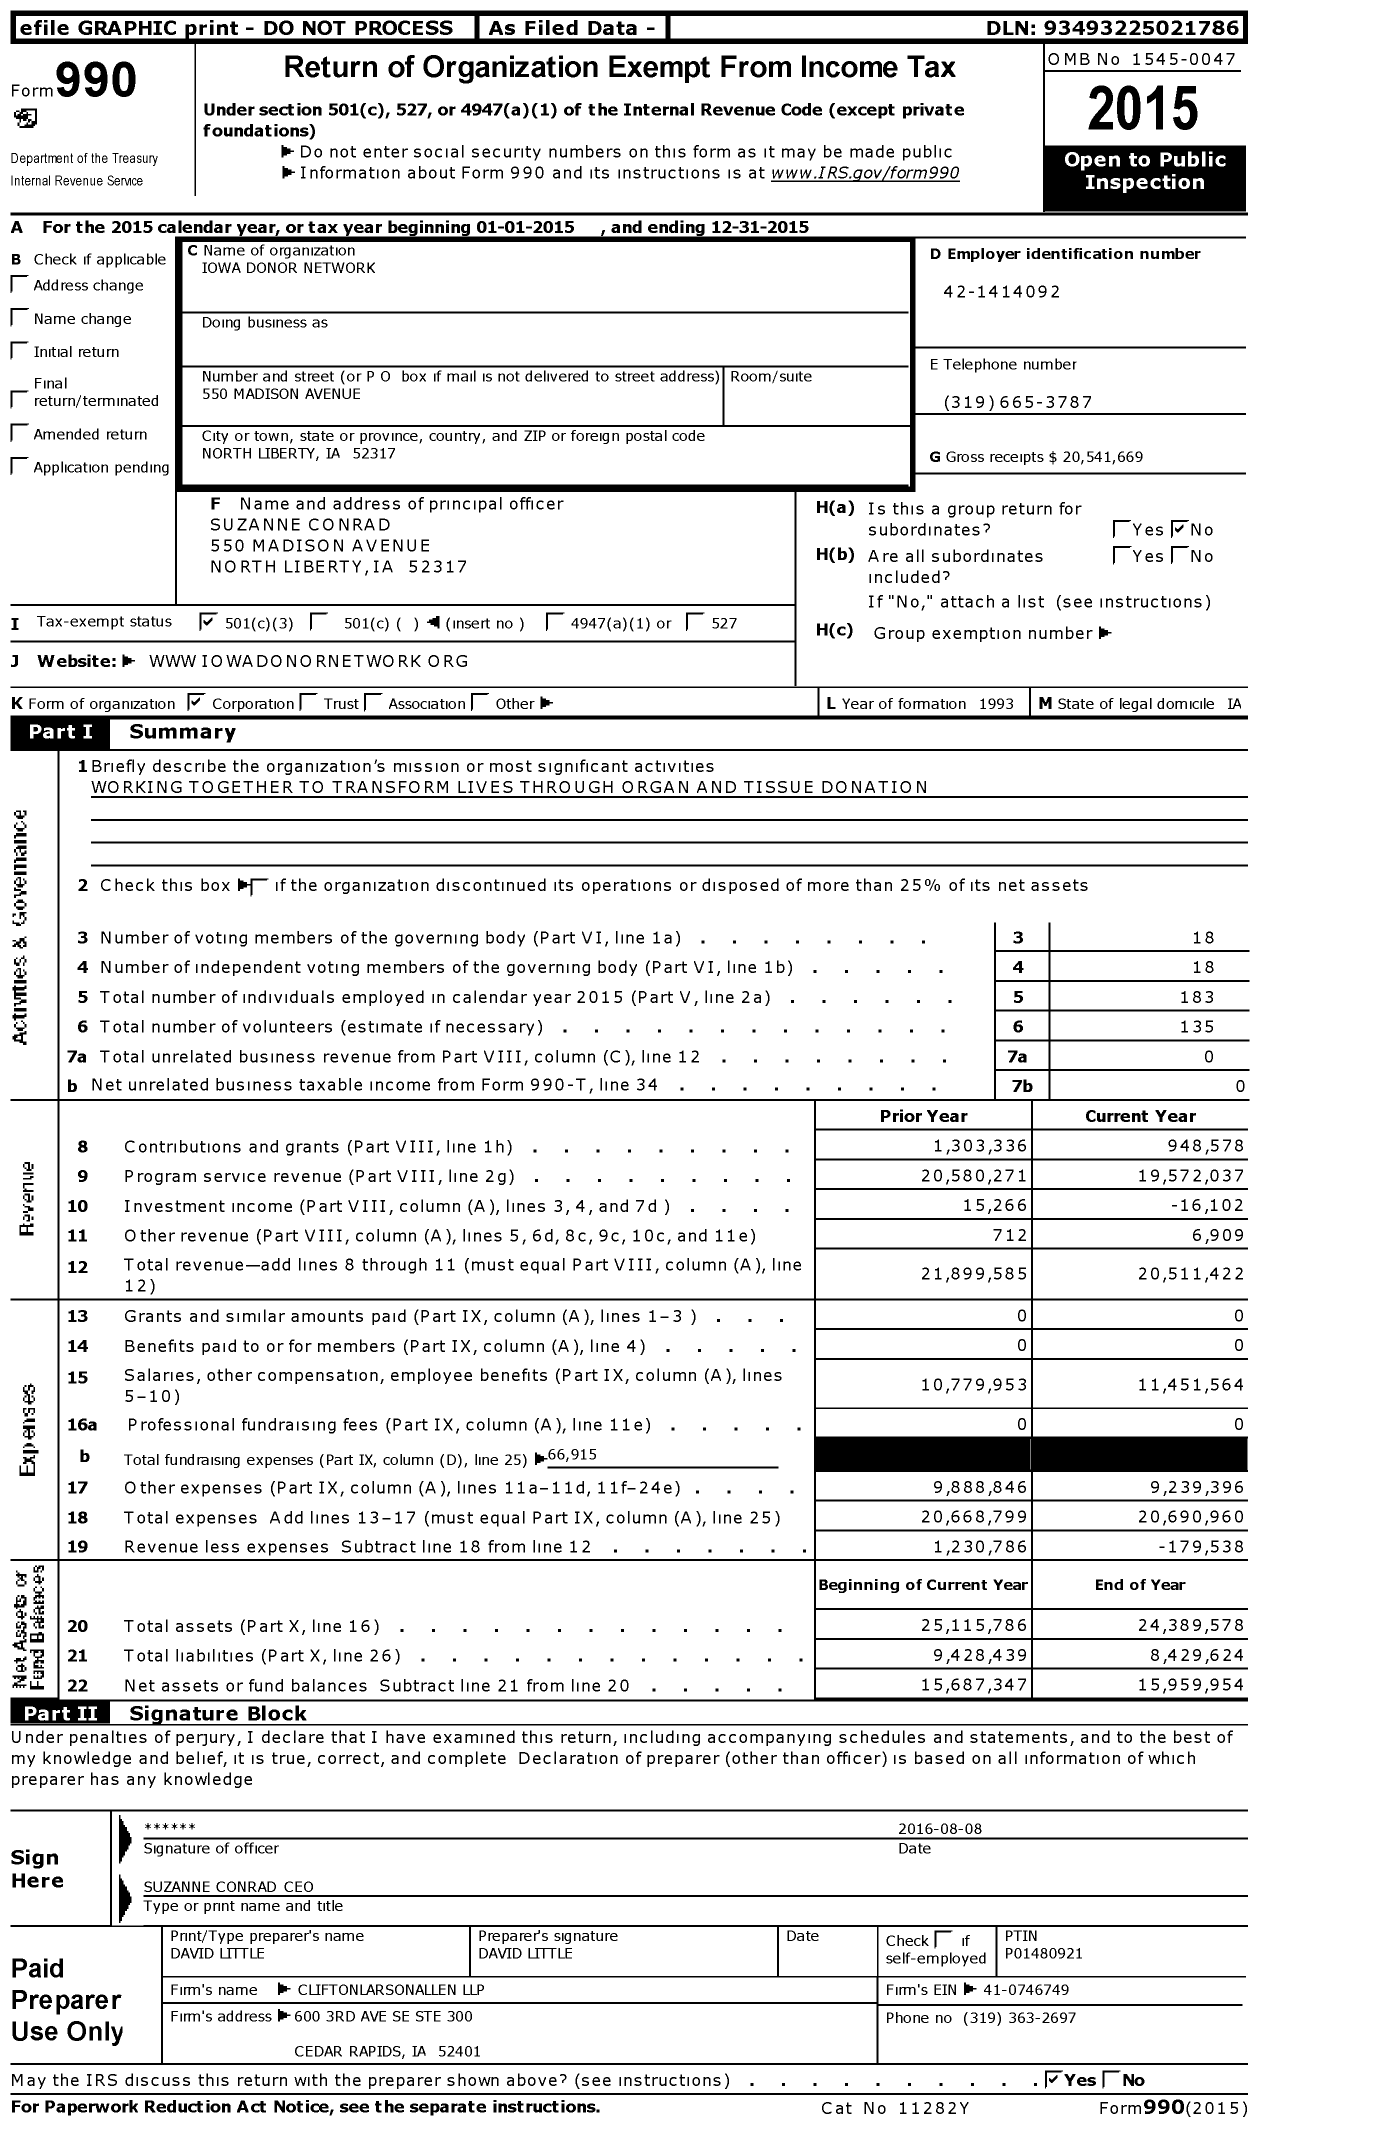 Image of first page of 2015 Form 990 for Iowa Donor Network (IDN)